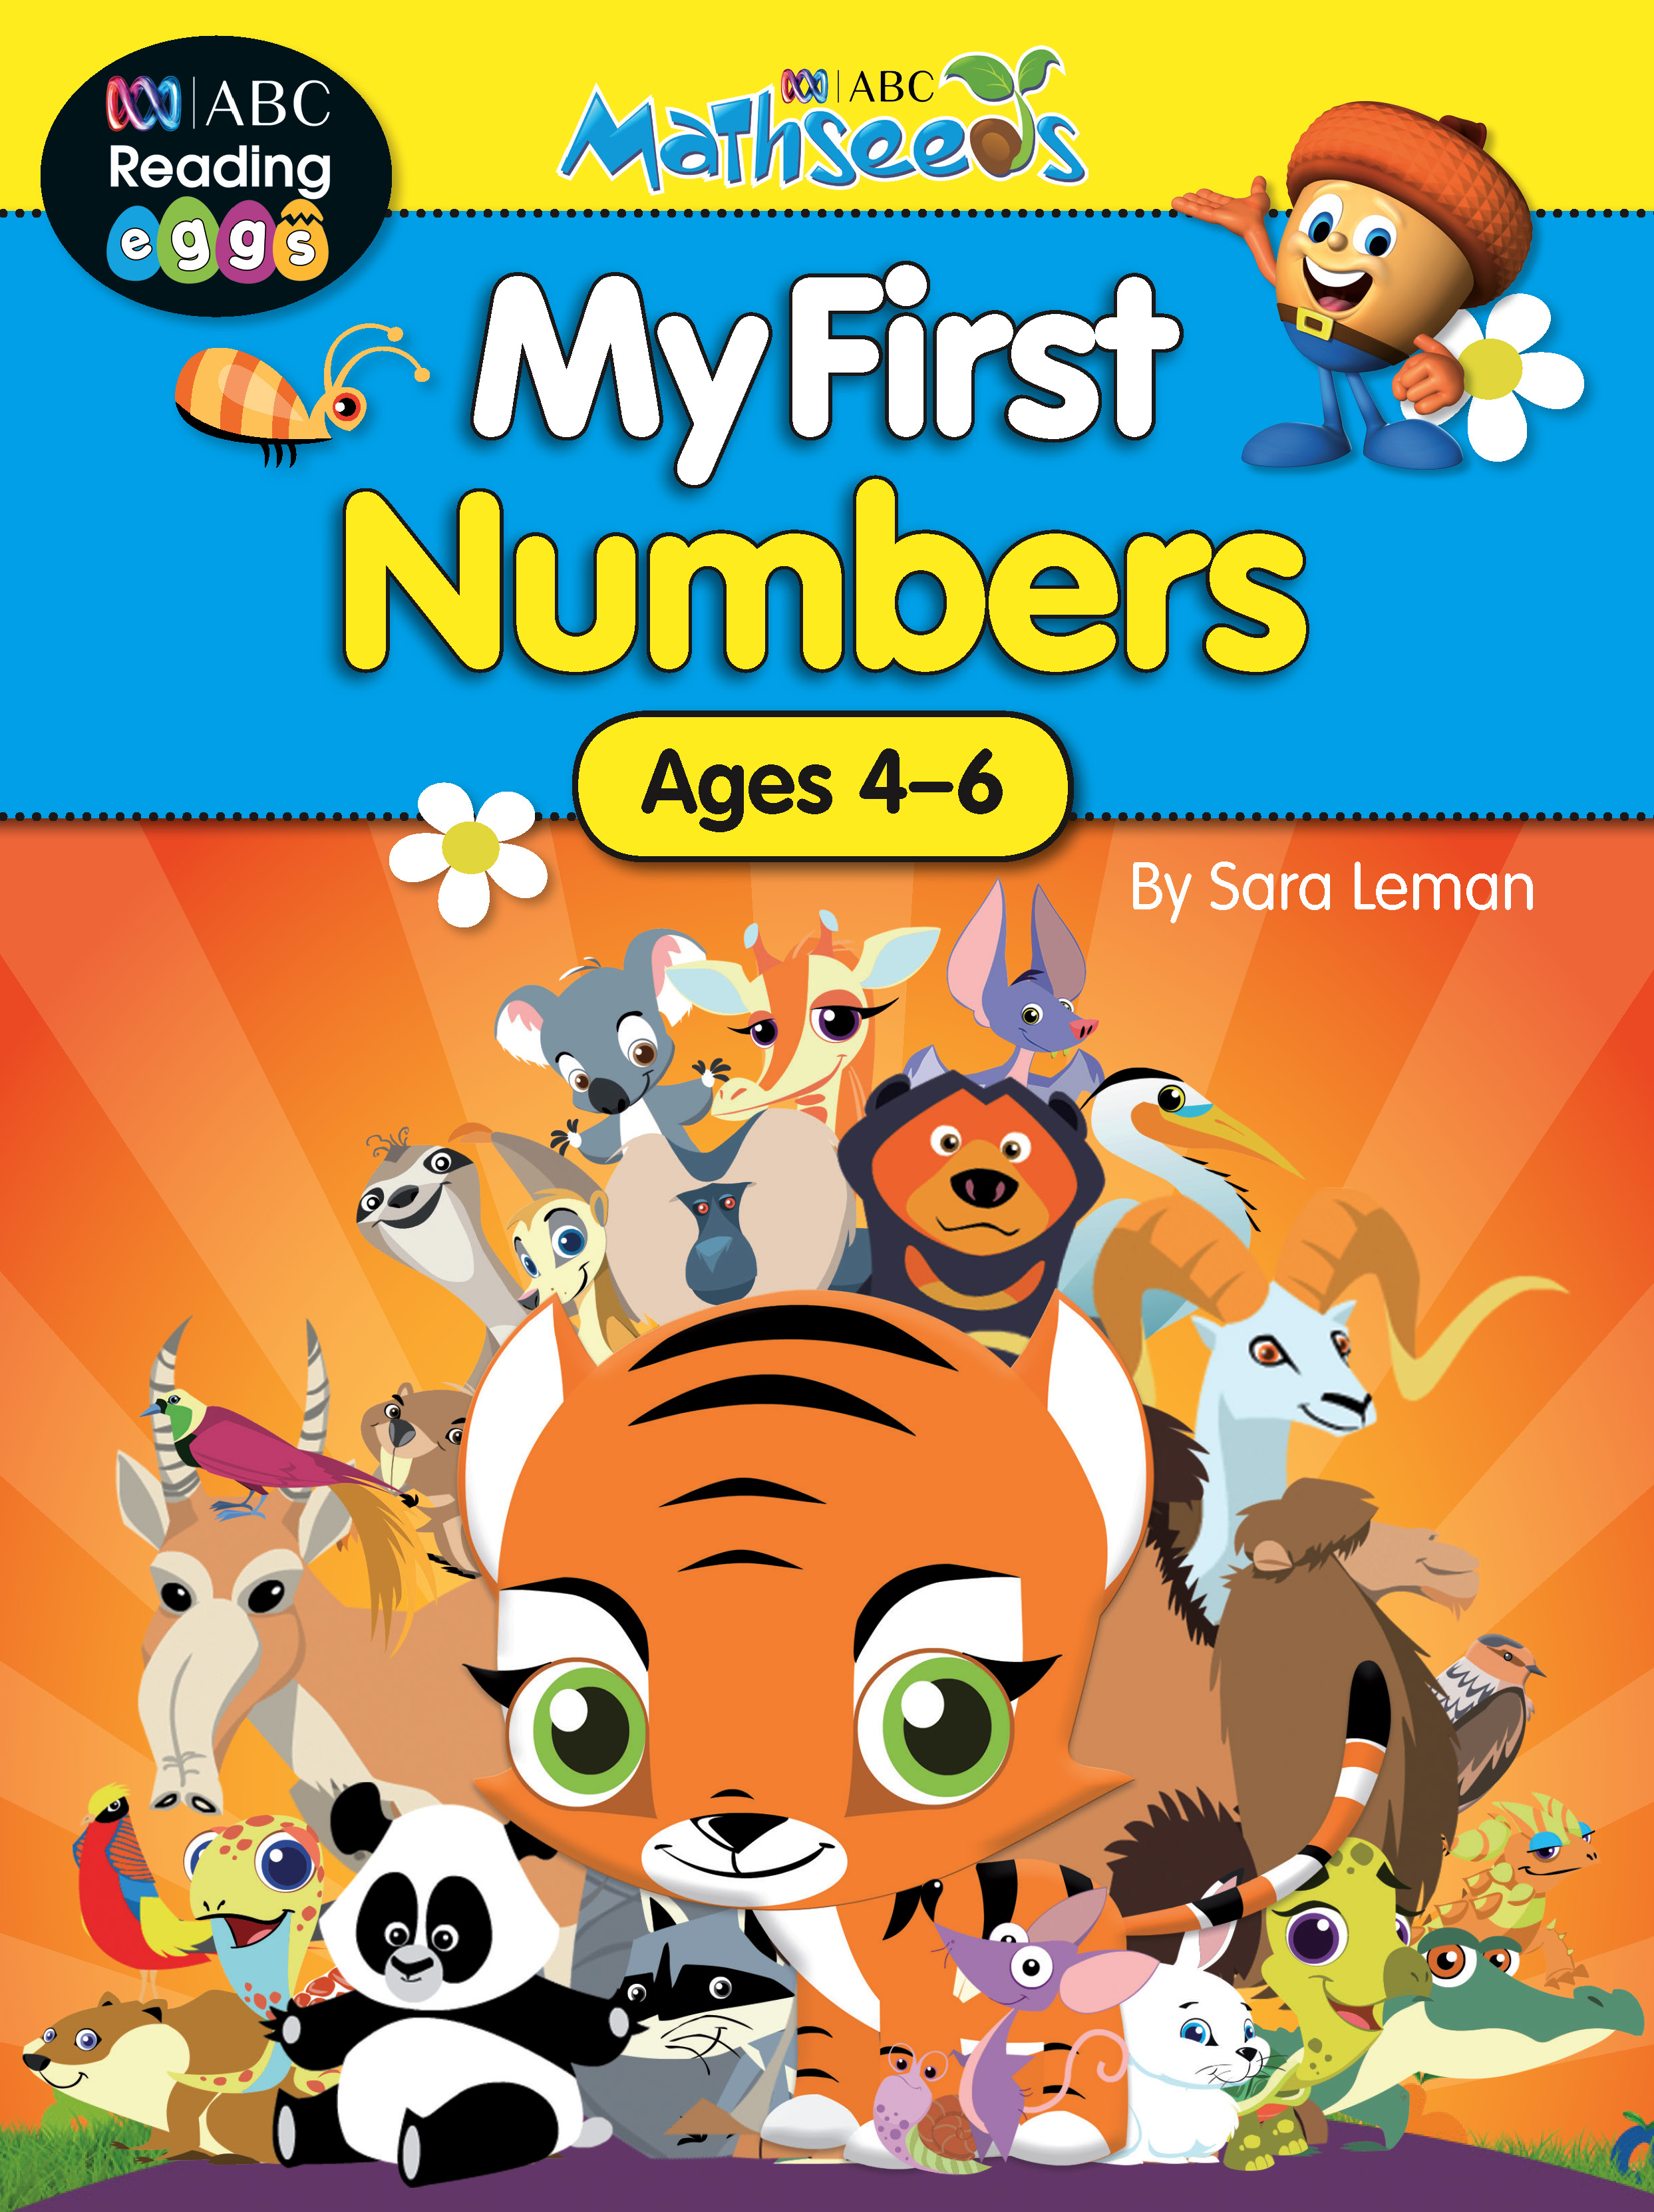 Picture of ABC Mathseeds My First Numbers Activity Book